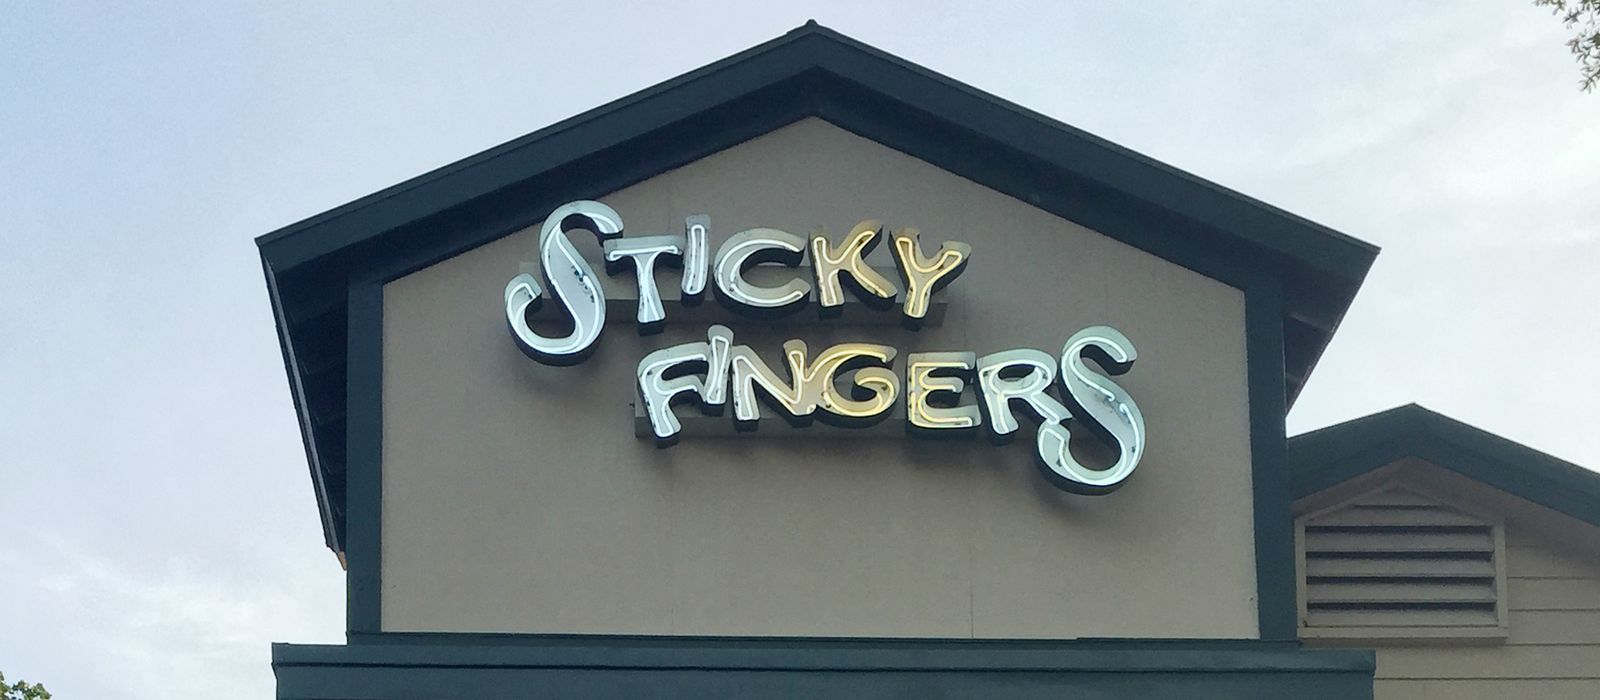 Das Sticky Fingers Ribhouse in Mt. Pleasant